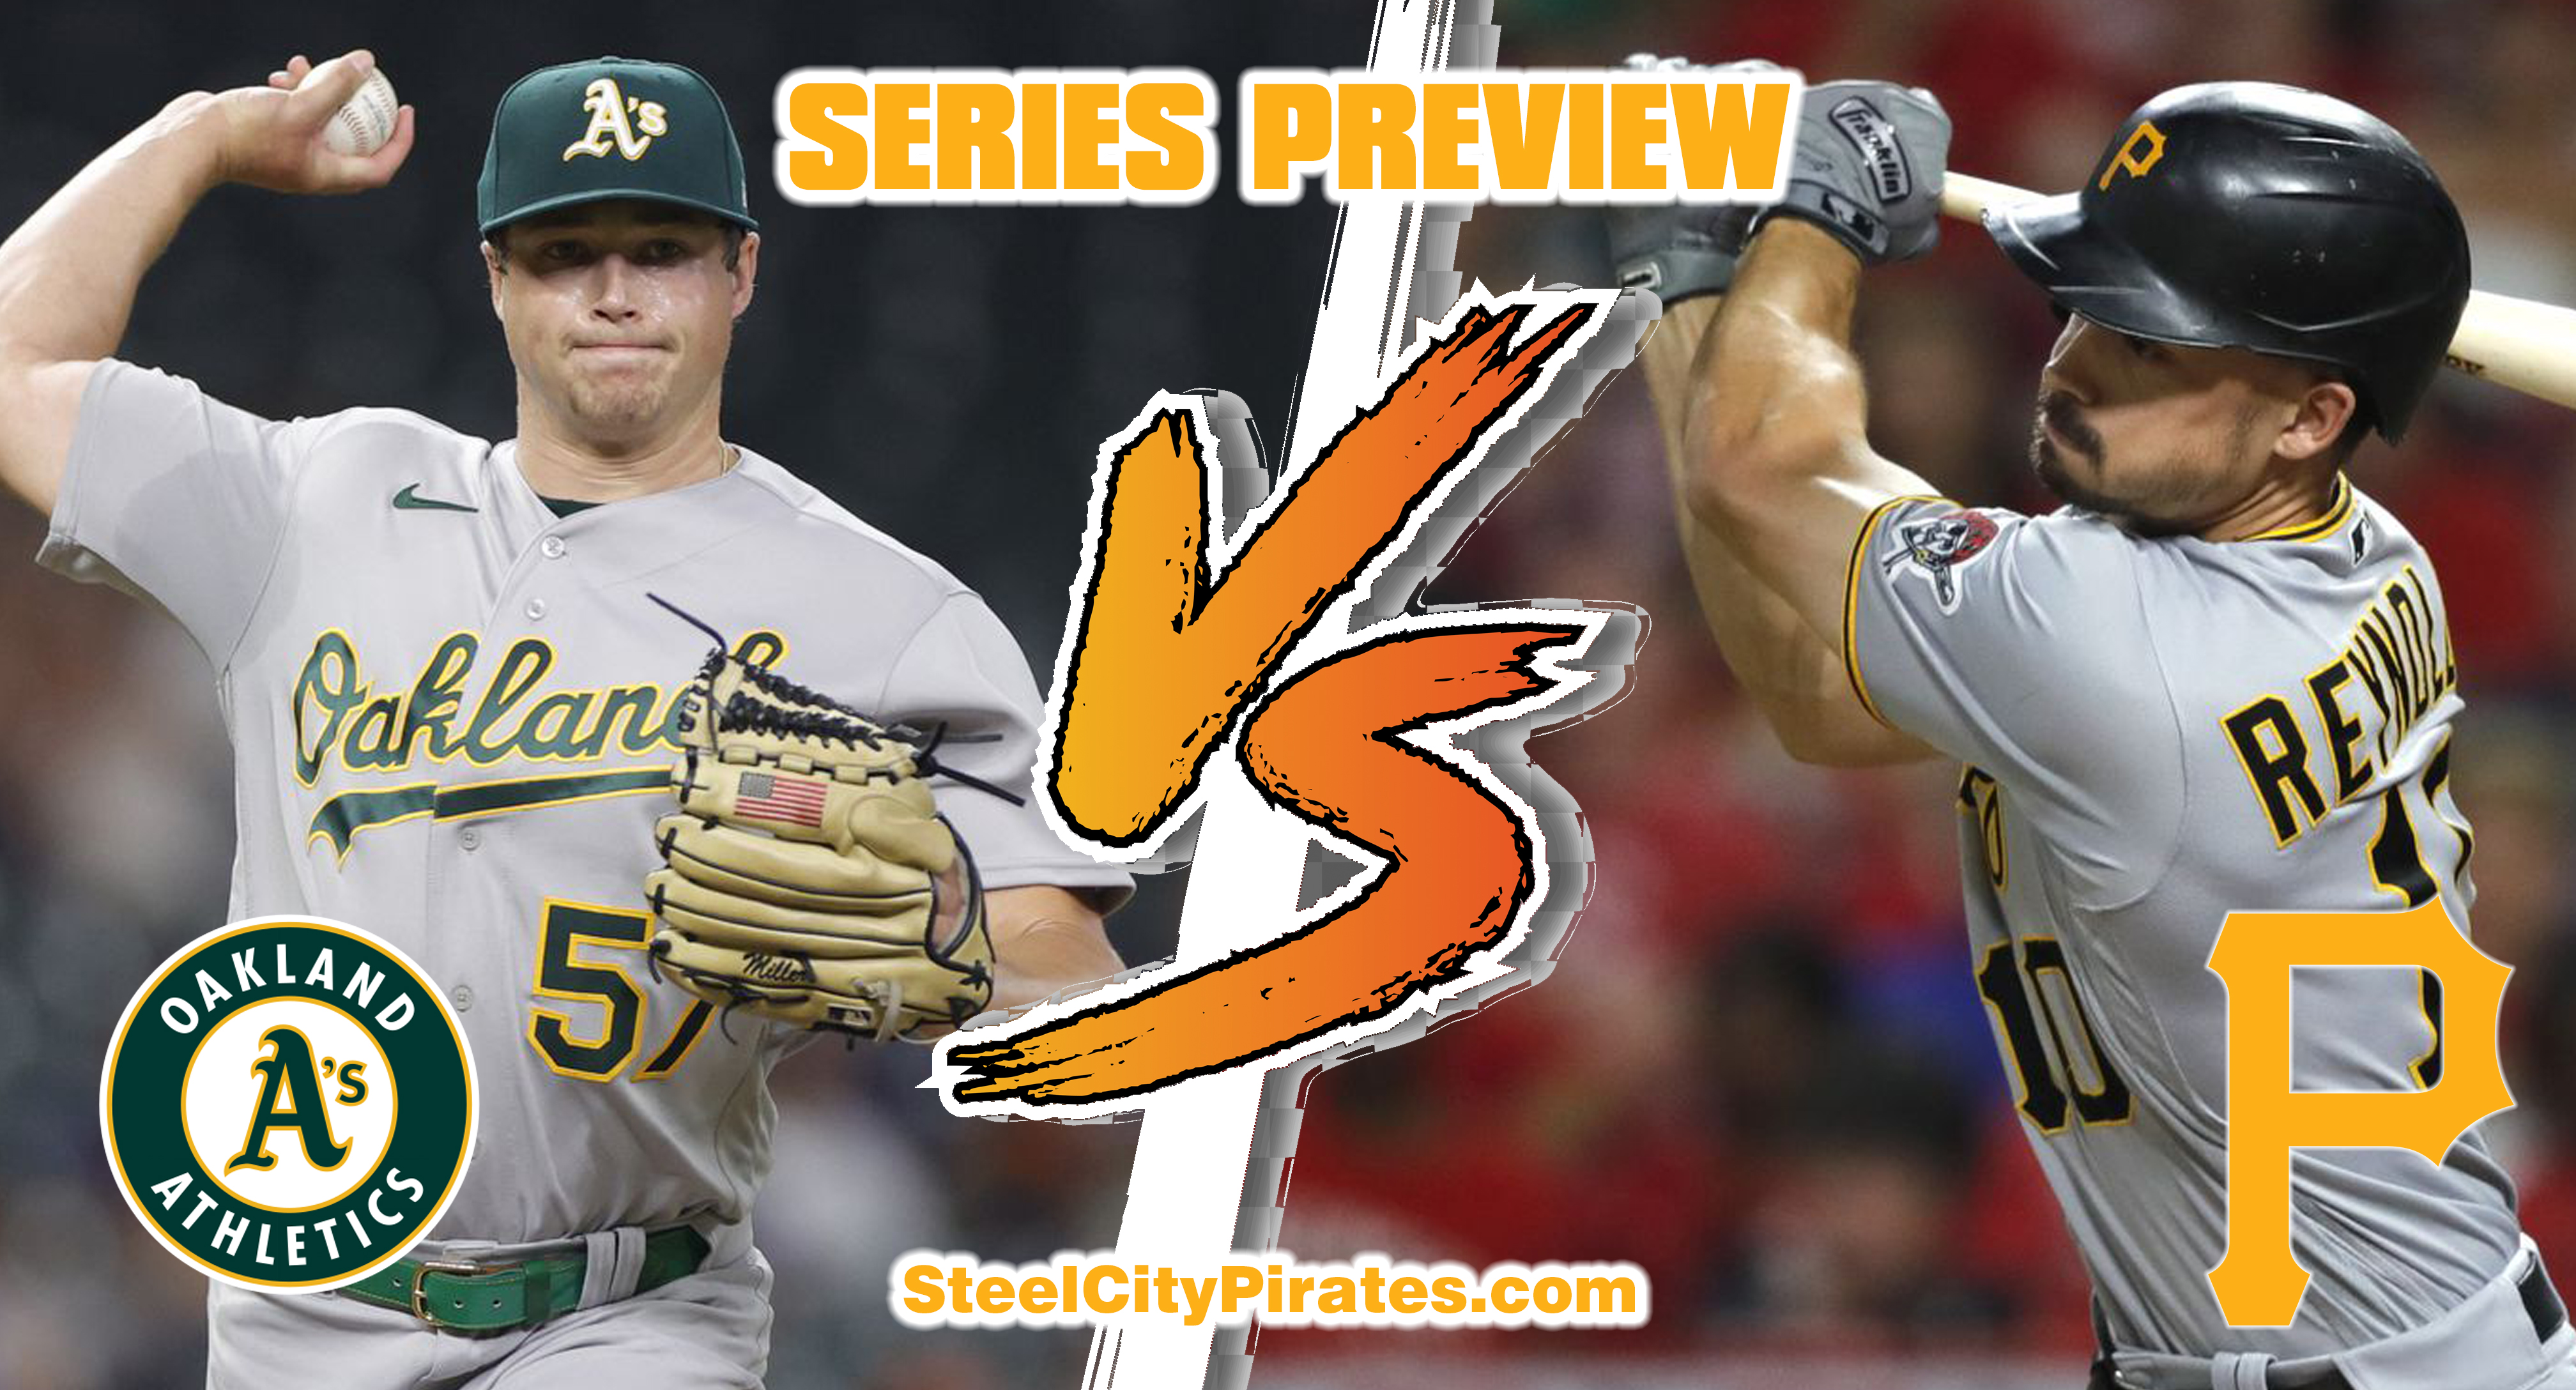 Series Preview: Pirates (14-15) at A’s (12-17)